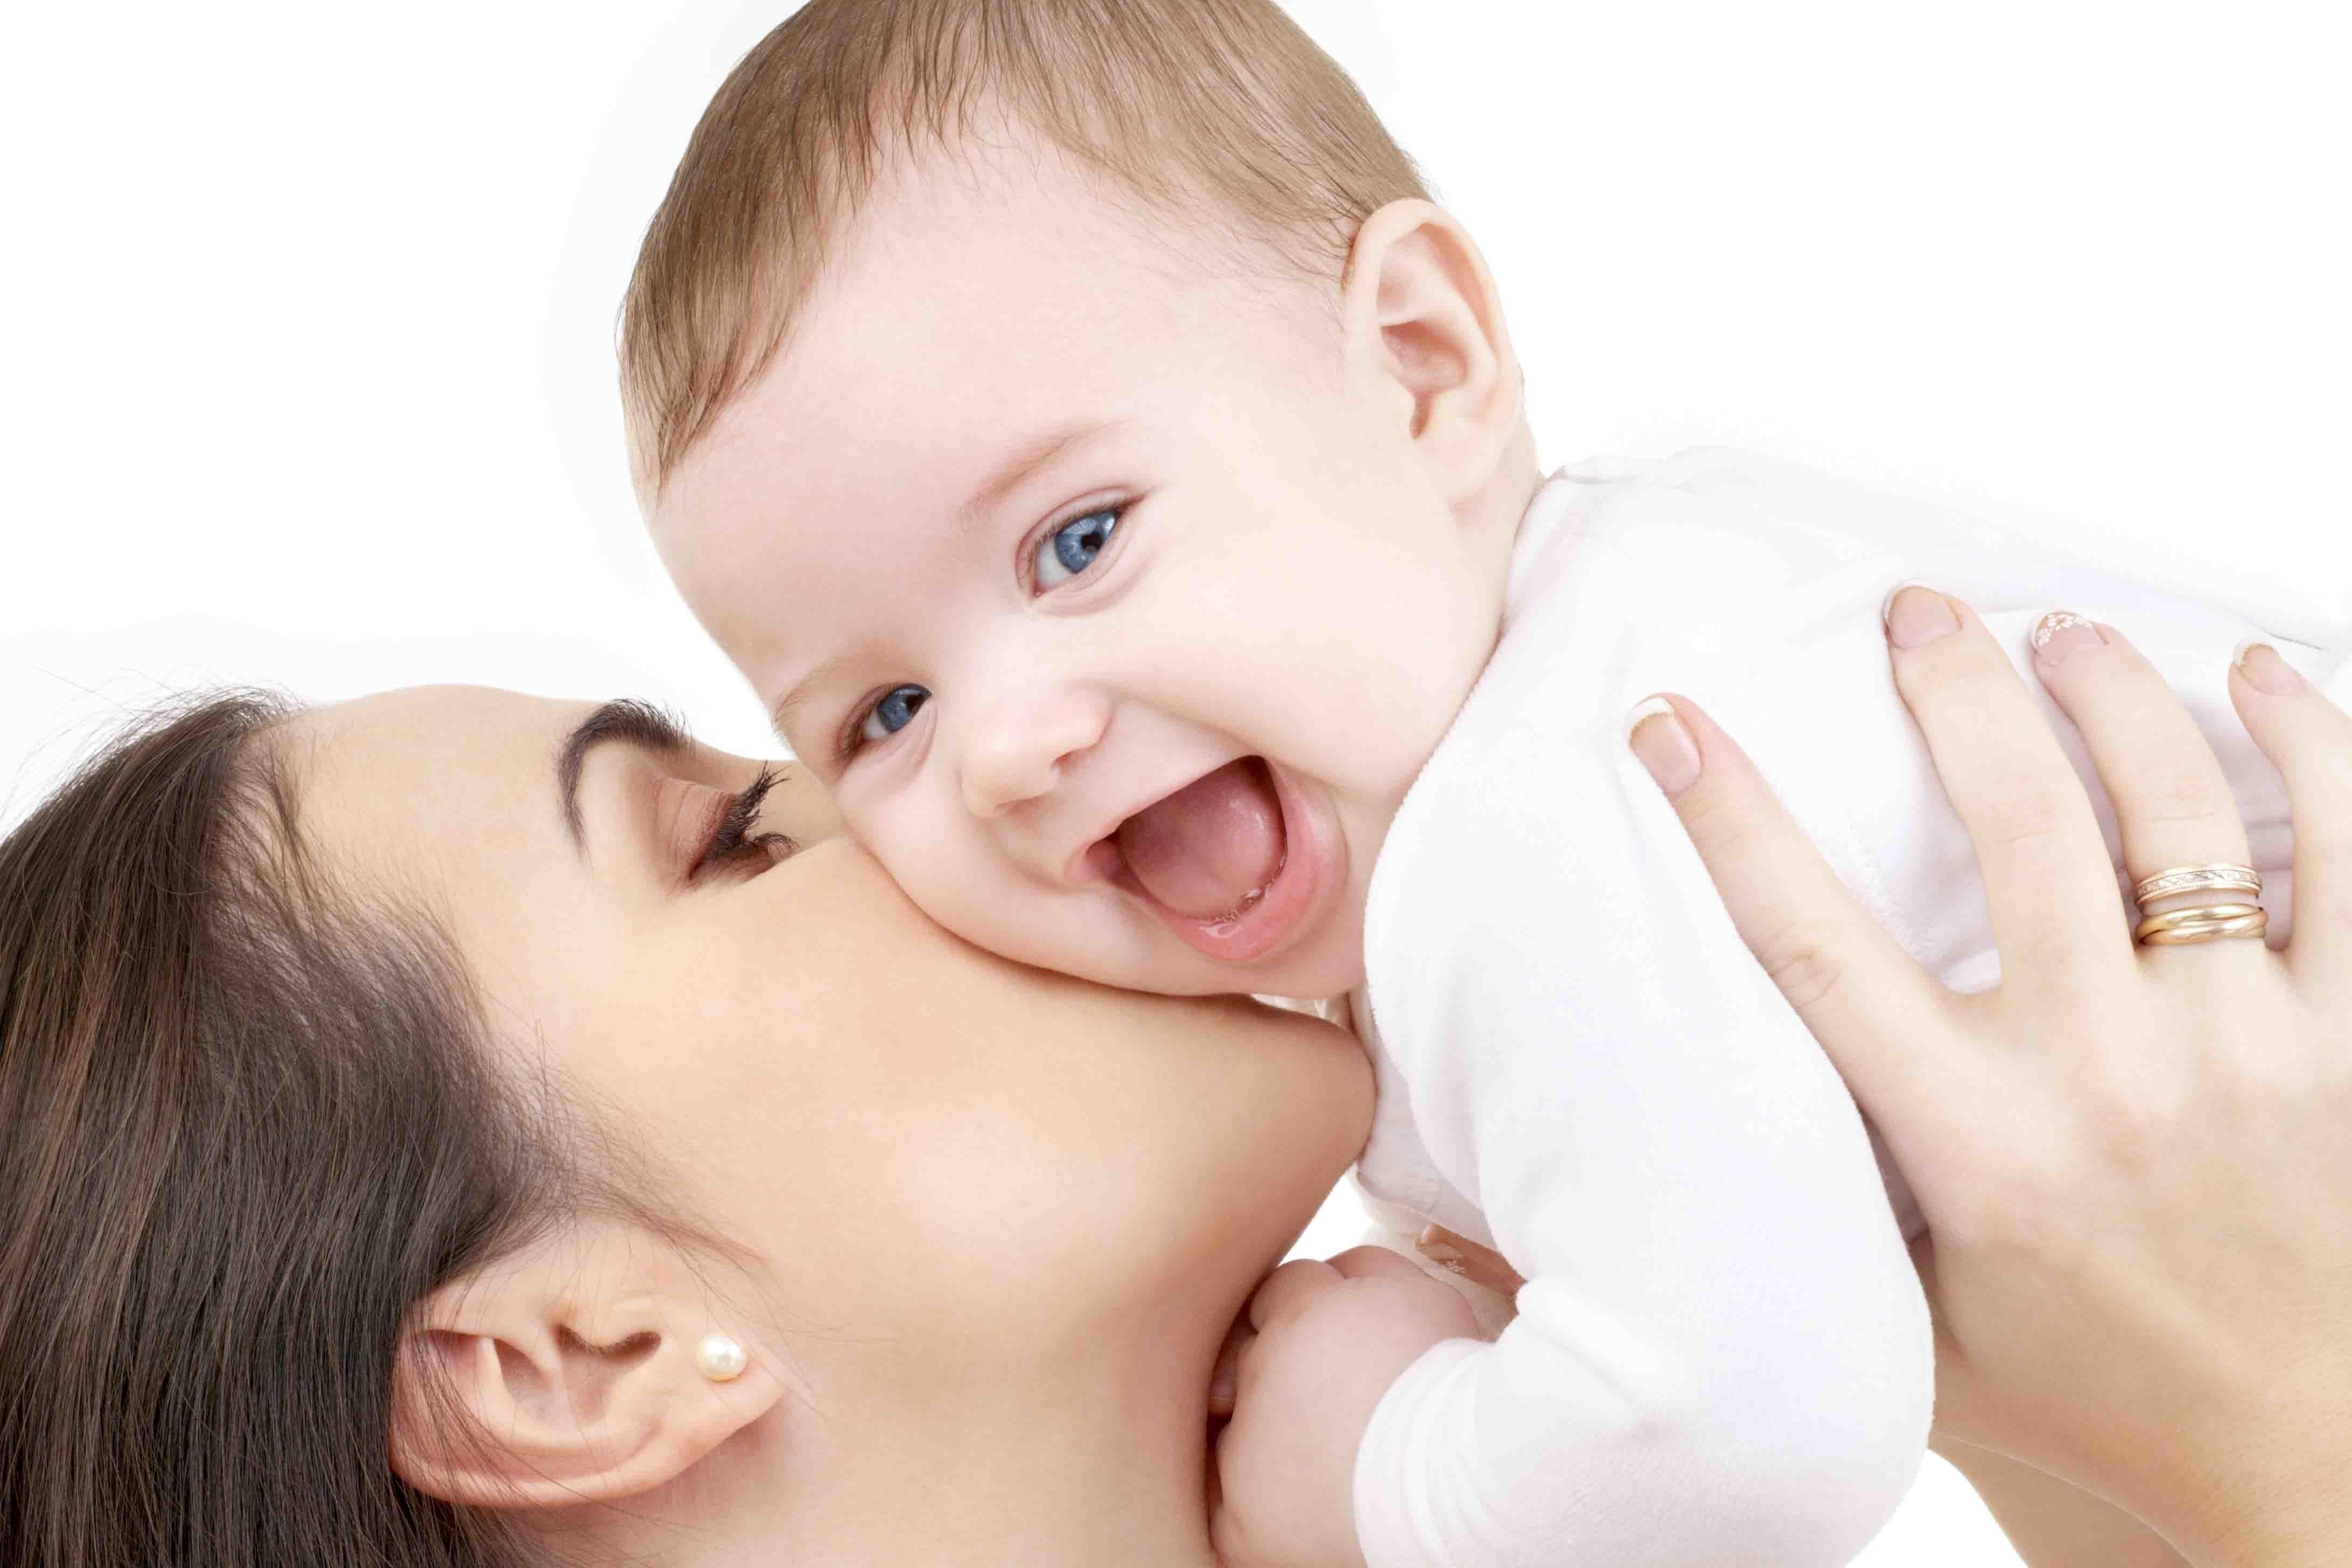 baby mom love latest HD wallpaper free download